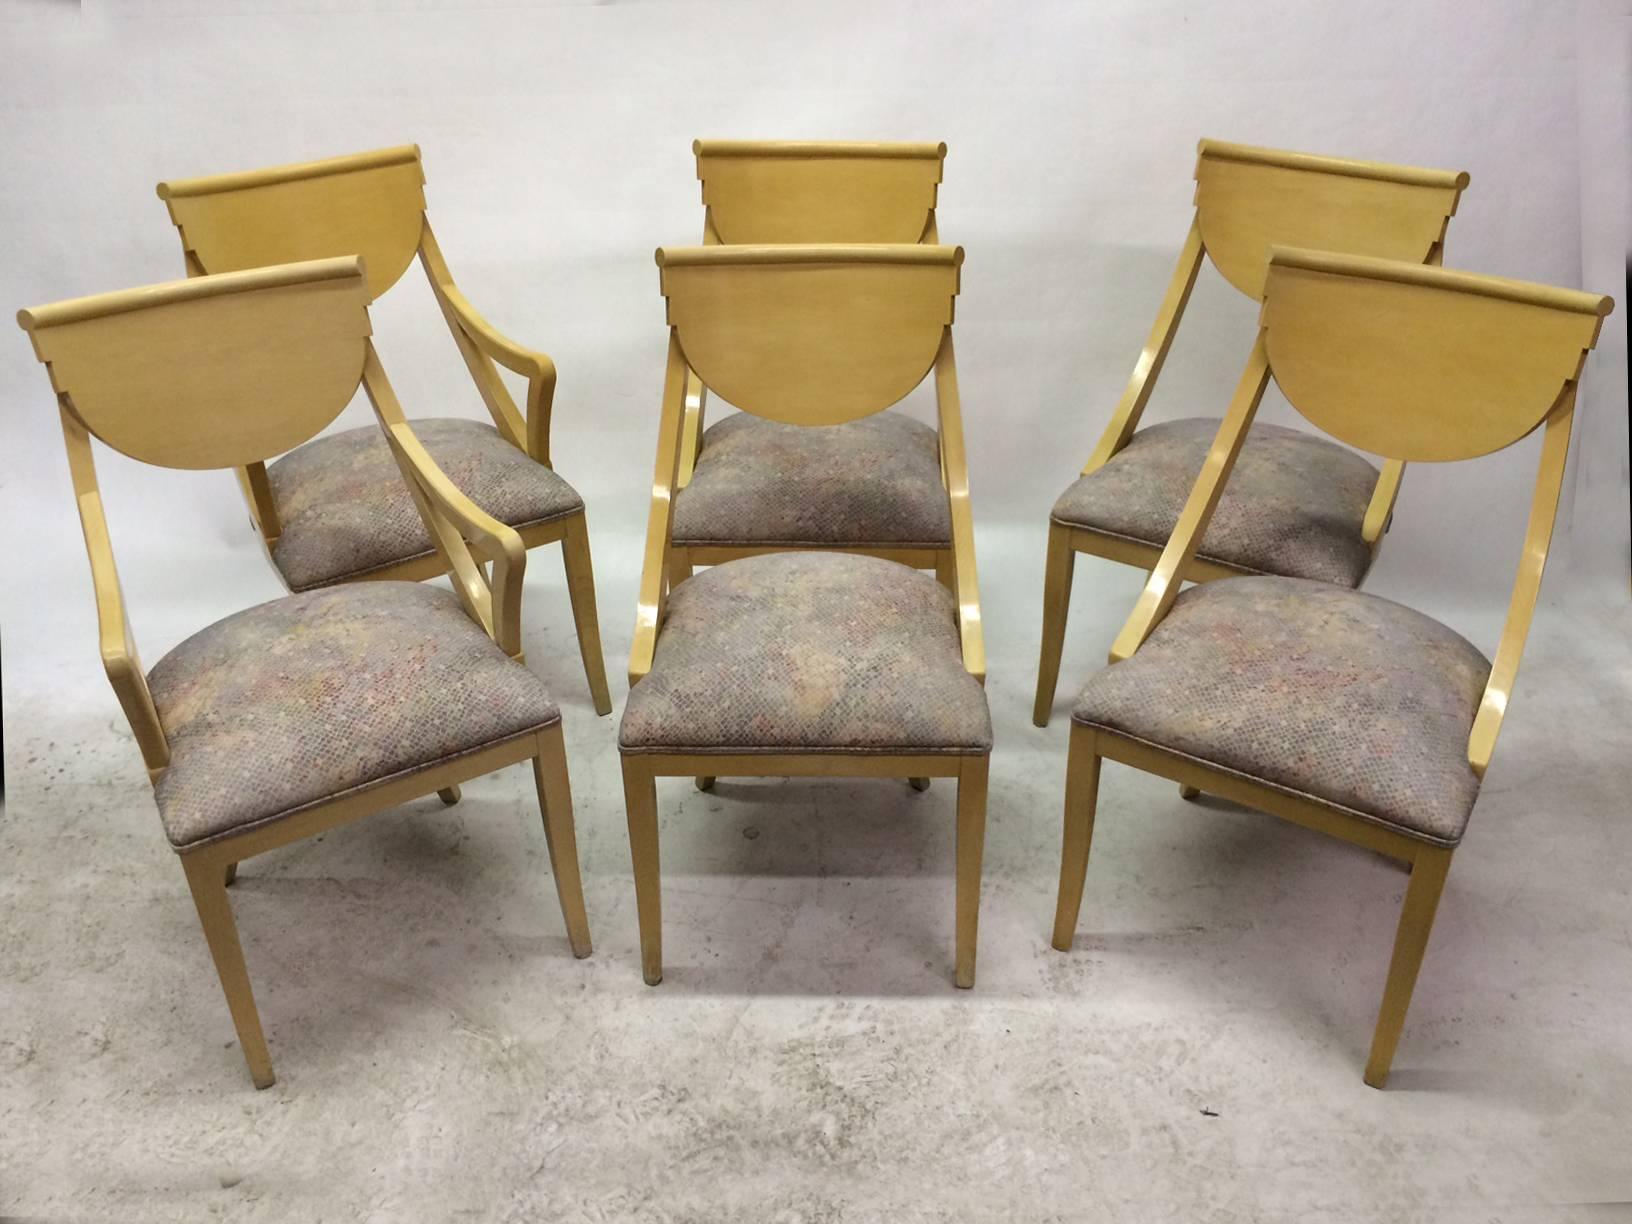 Set of two captain and four dining chairs with their original cream lacquer finish and original fabric. Very well crafted. Note the back details. They are very sturdy and very comfortable with their gondola shape.